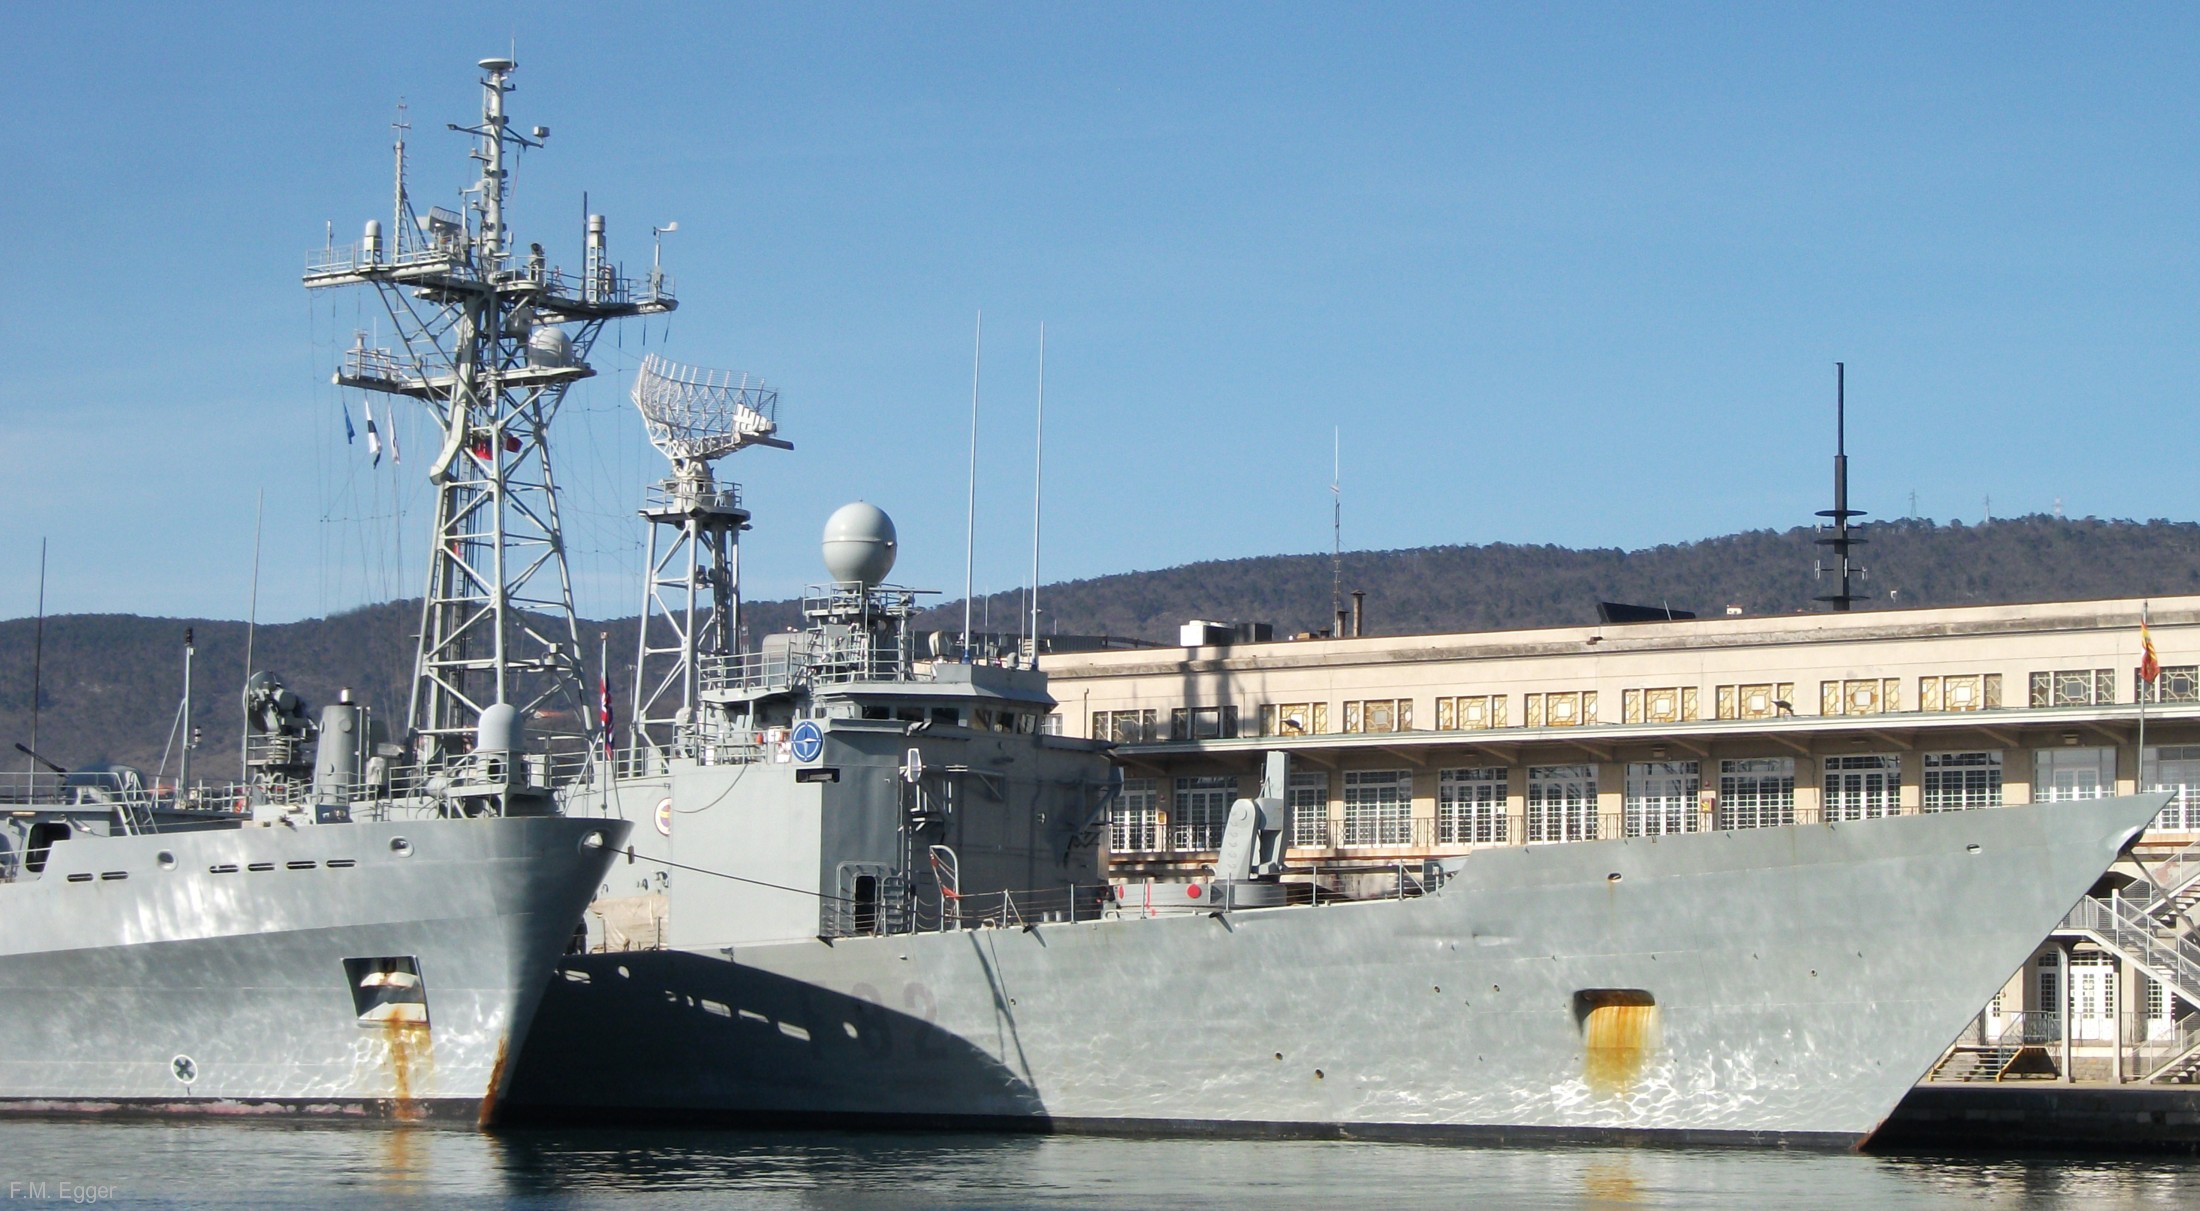 f-82 sps victoria f80 santa maria class guided missile frigate spanish navy nato snmg-2 trieste 17bx